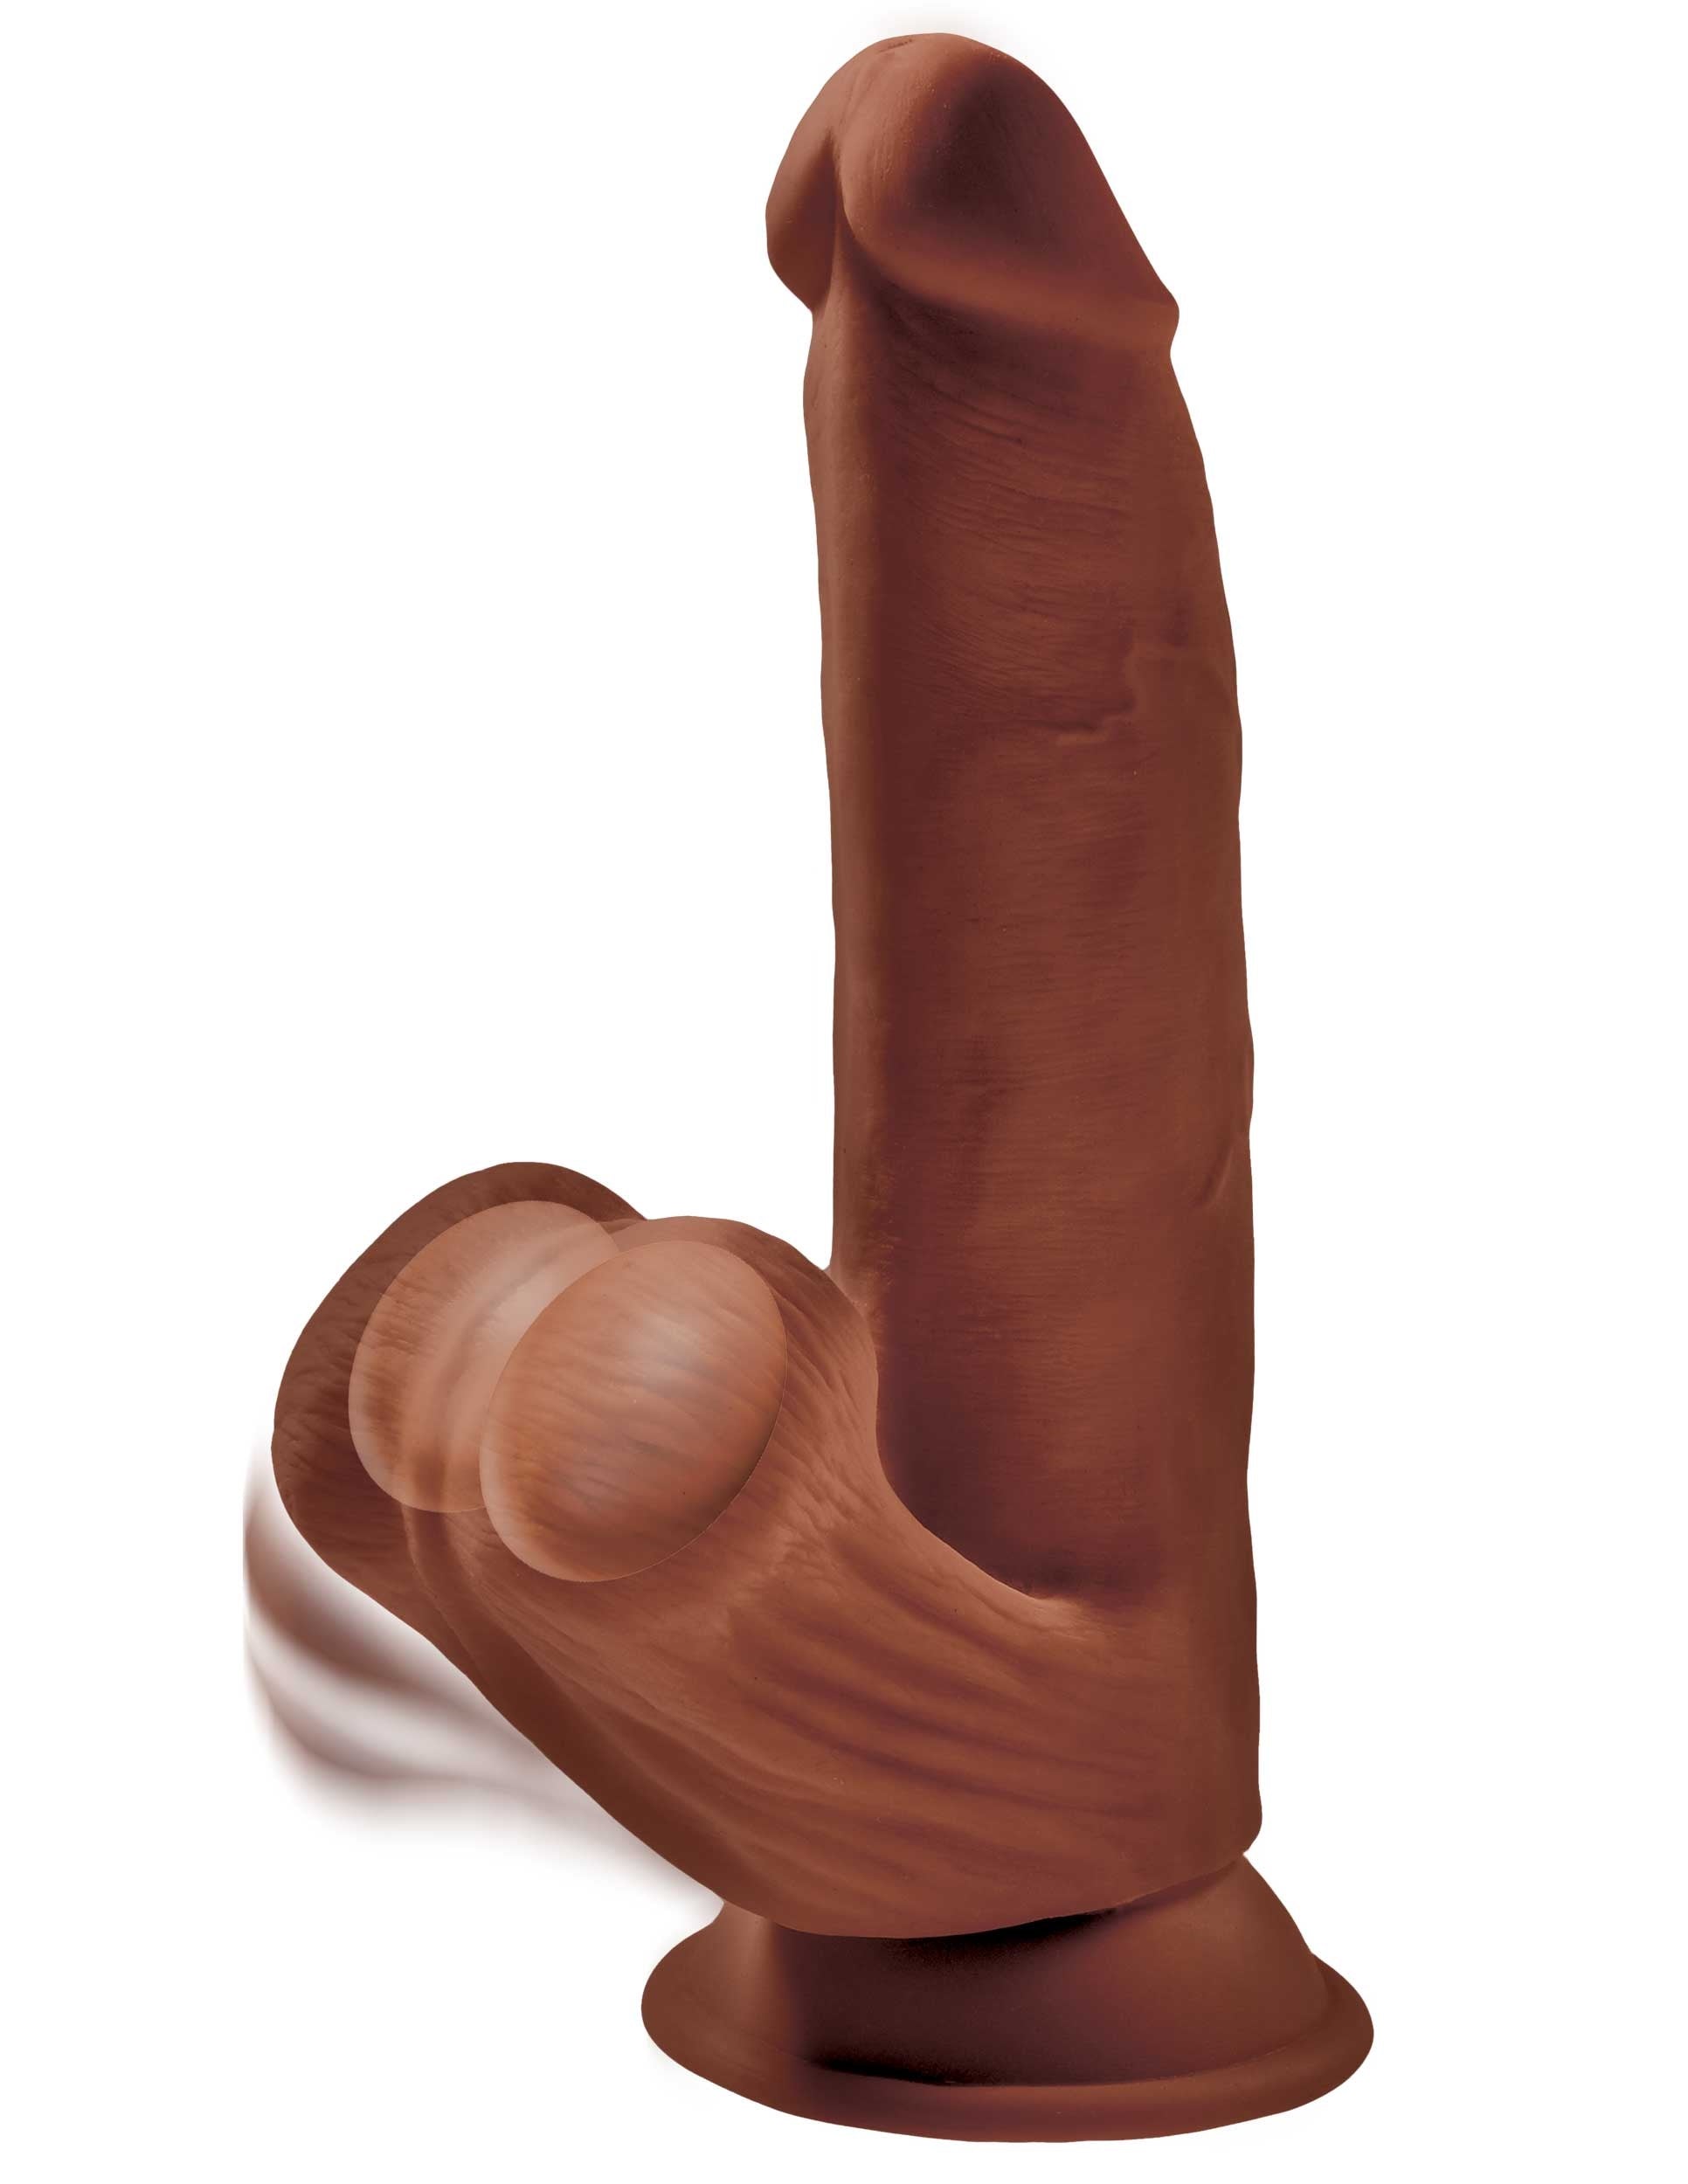 8 Inch Triple Density Cock With Swinging Balls -  Brown-3